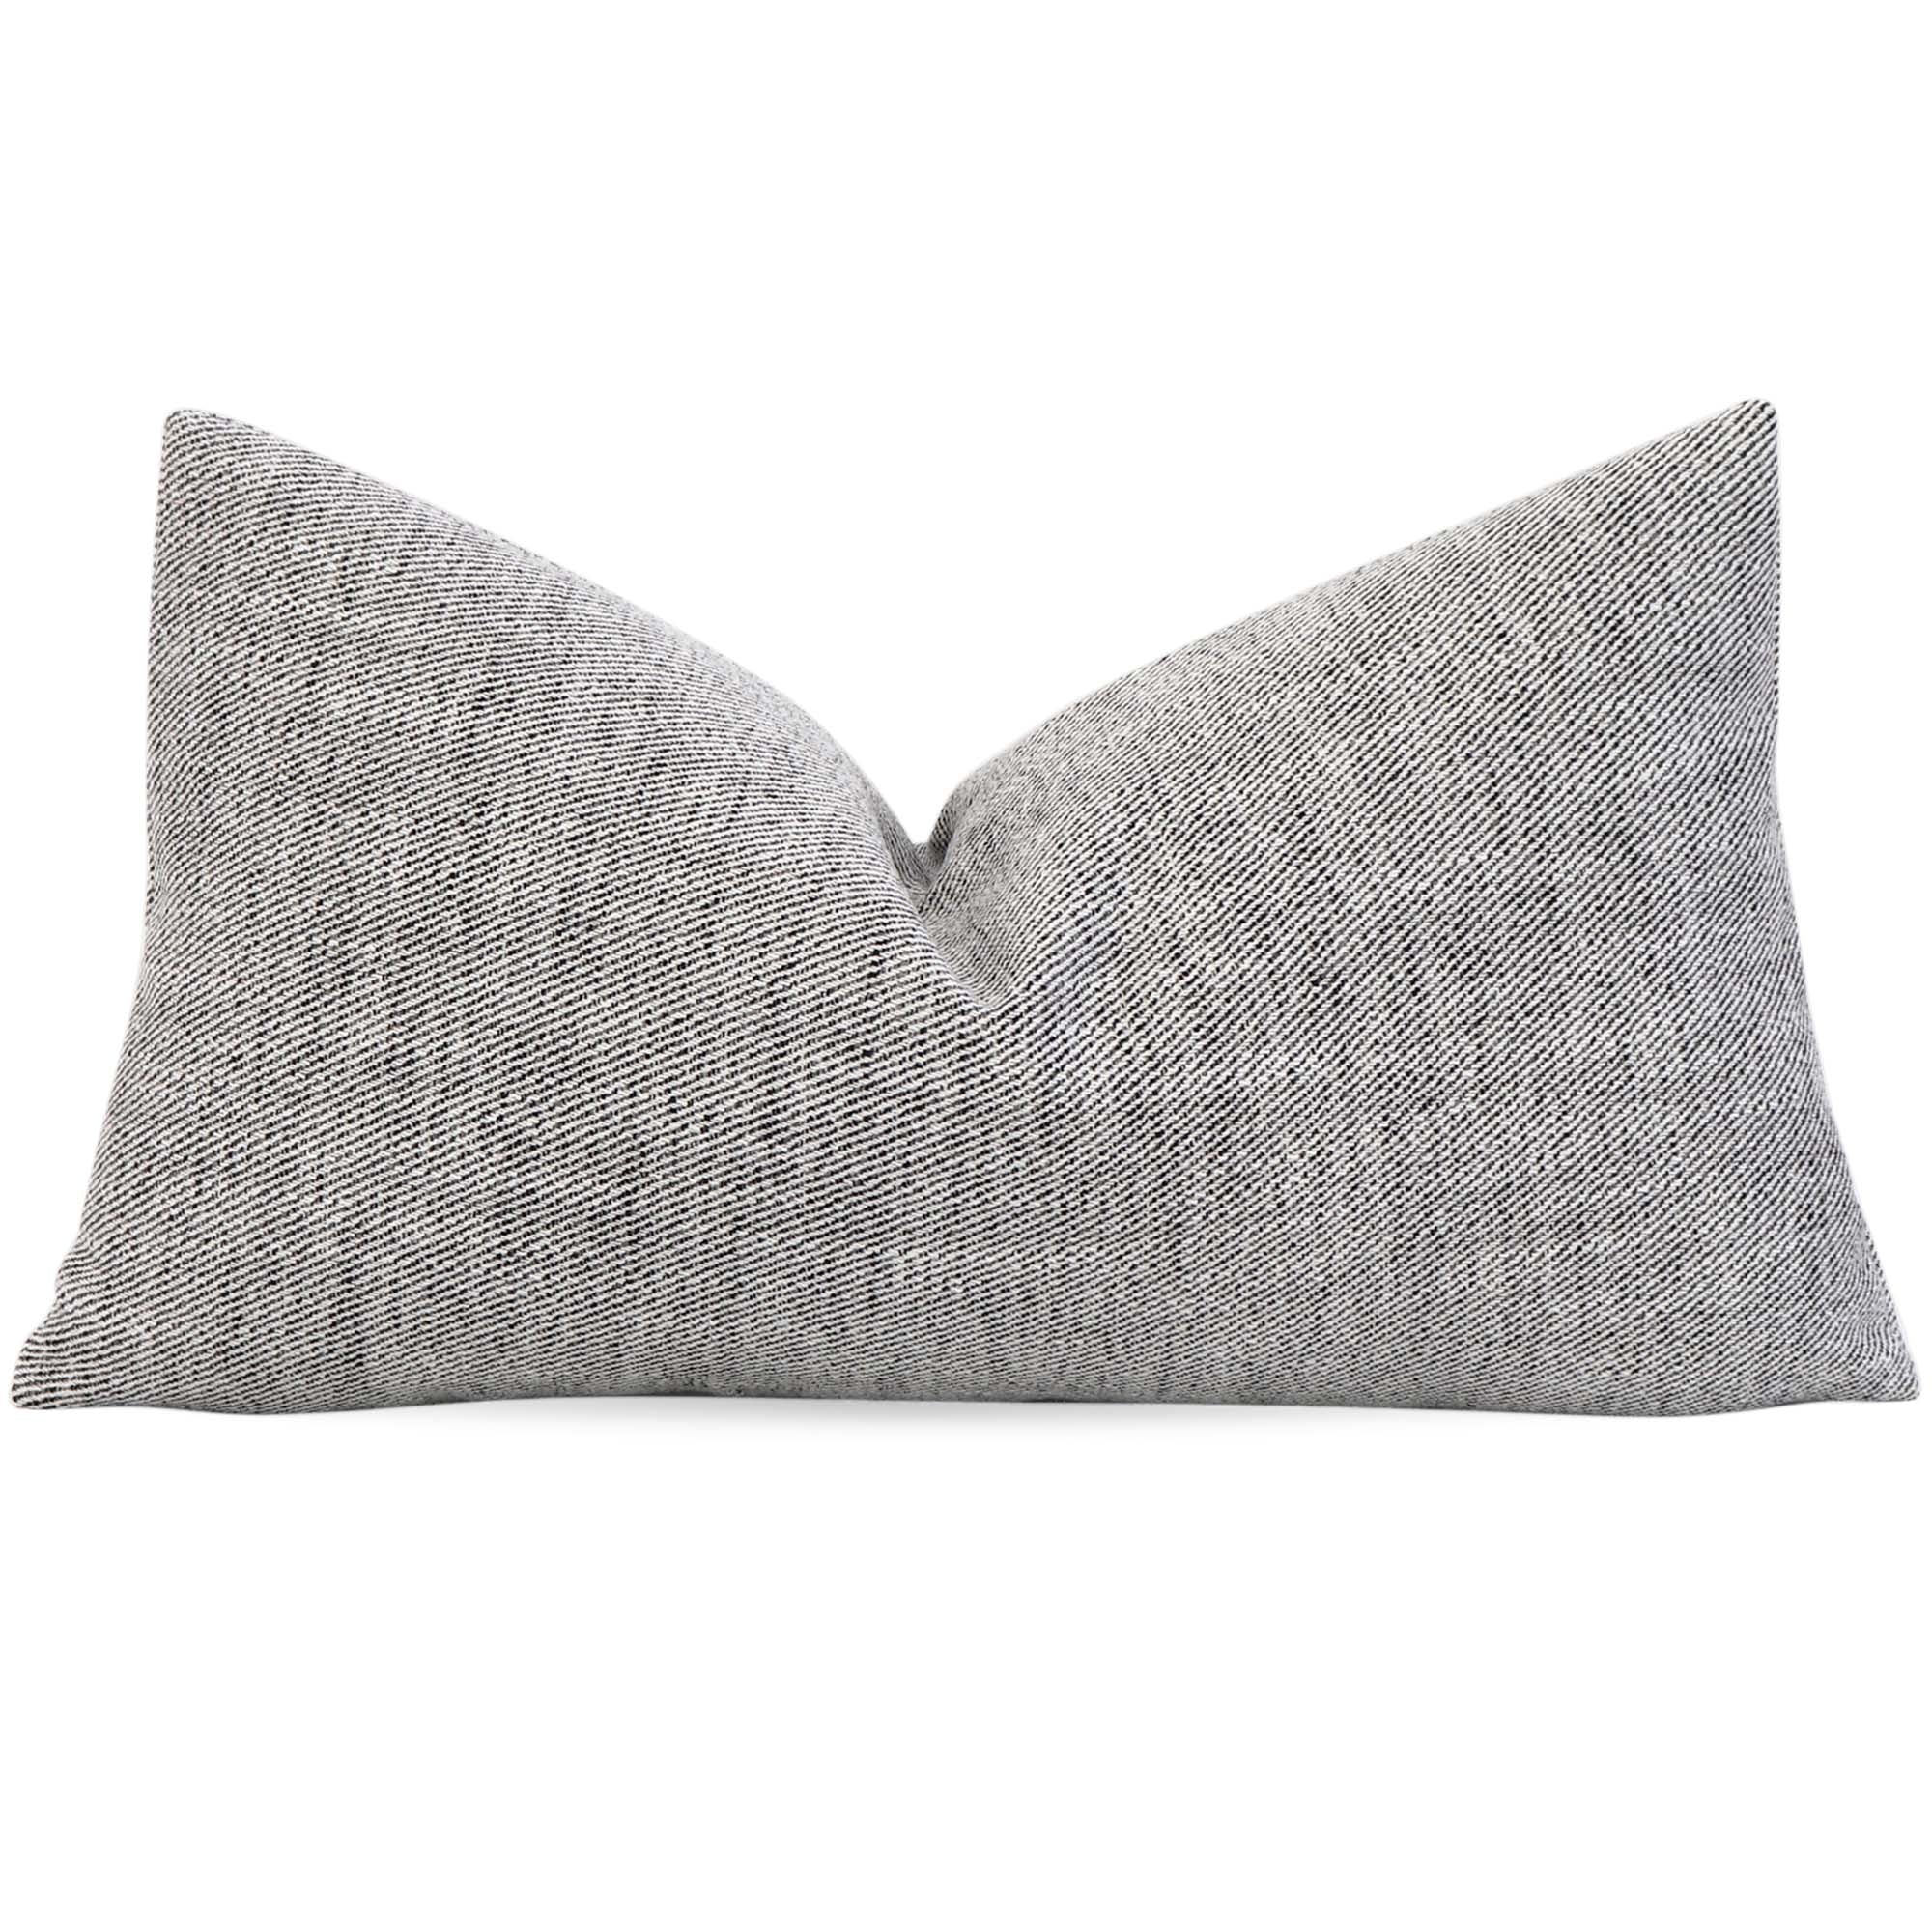 Stain Resistant! Everett Performance Twill Charcoal Throw Pillow Cover -  Chloe & Olive